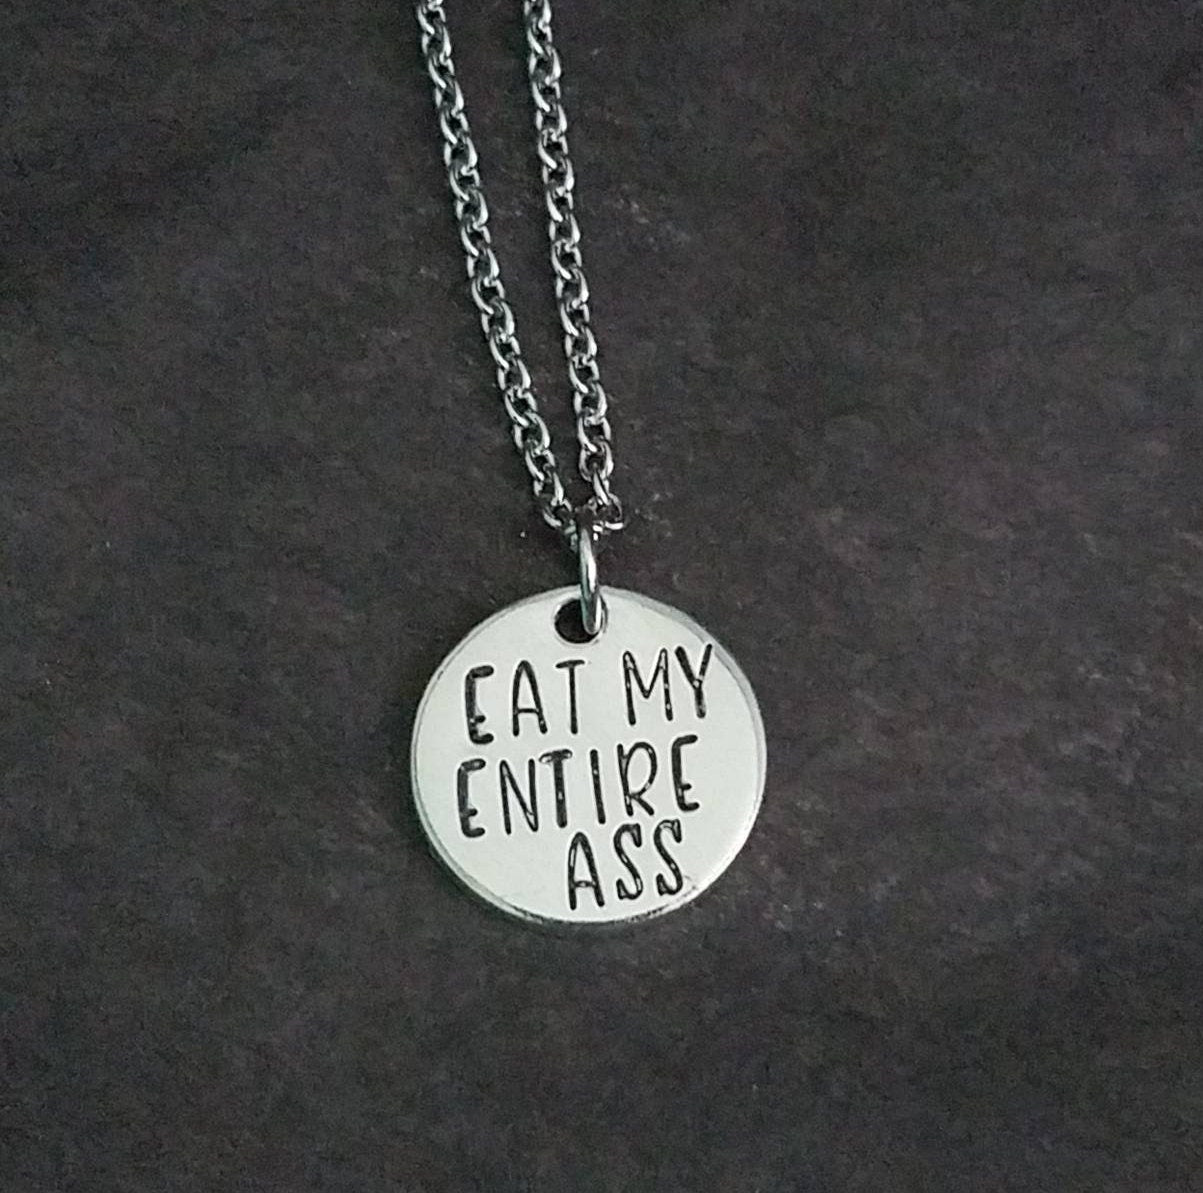 Eat My Entire Ass Hand Stamped Pendant Necklace